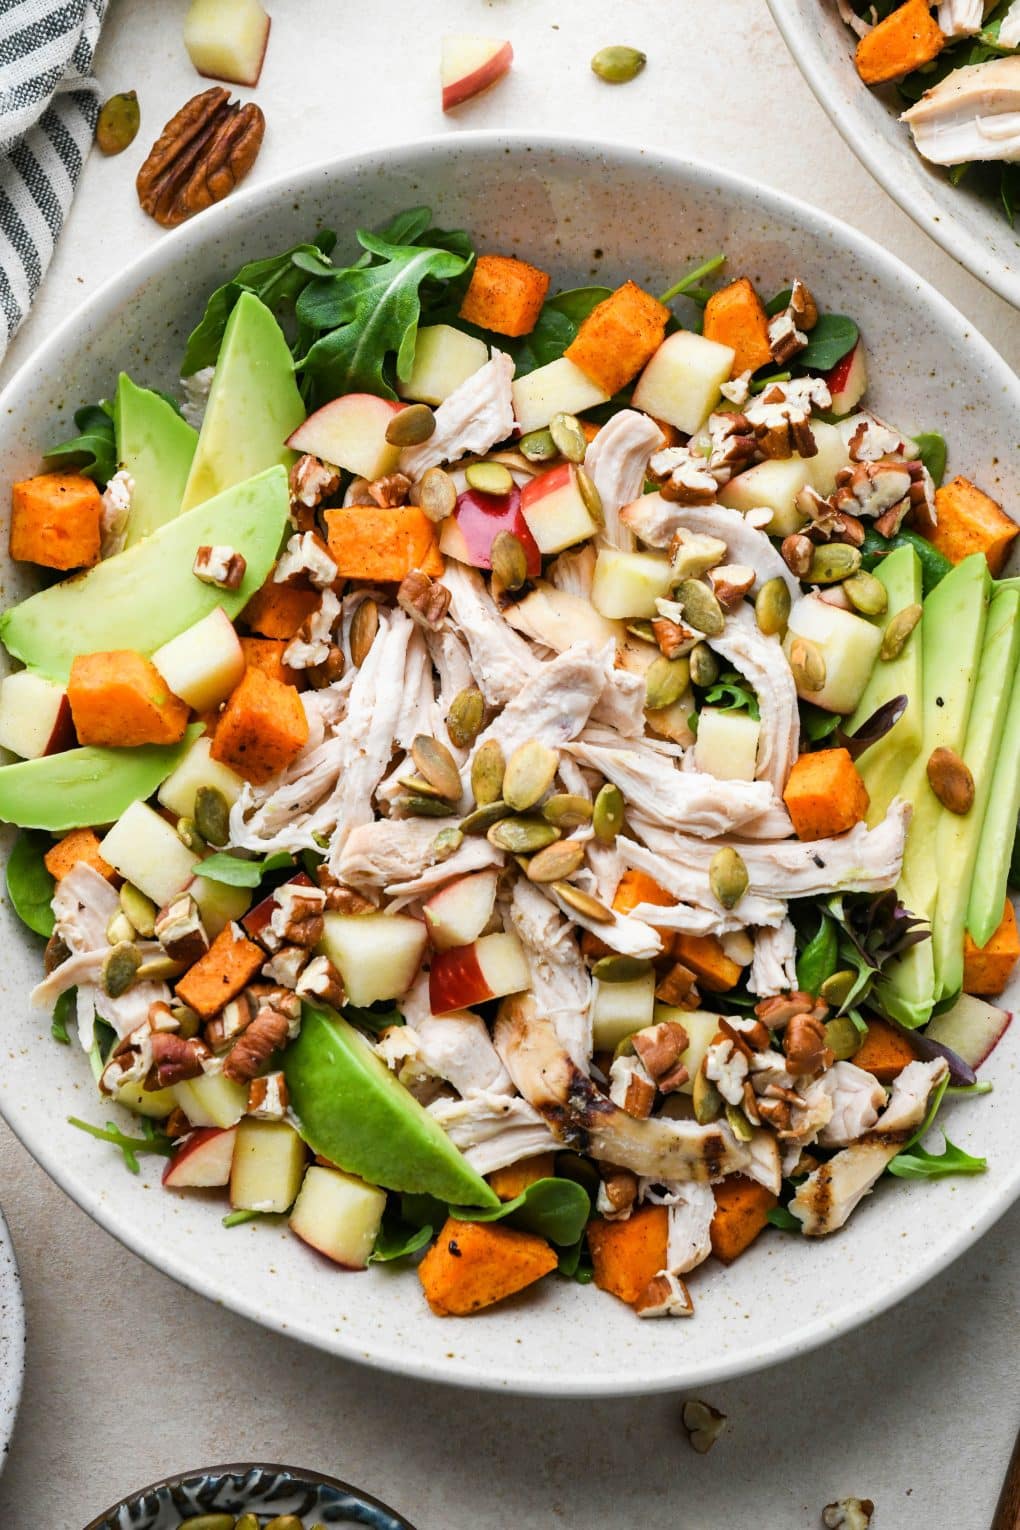 How to make Winter Chicken Salad: Salad ingredients assembled in a bowl after adding dressing, nuts, and seeds.